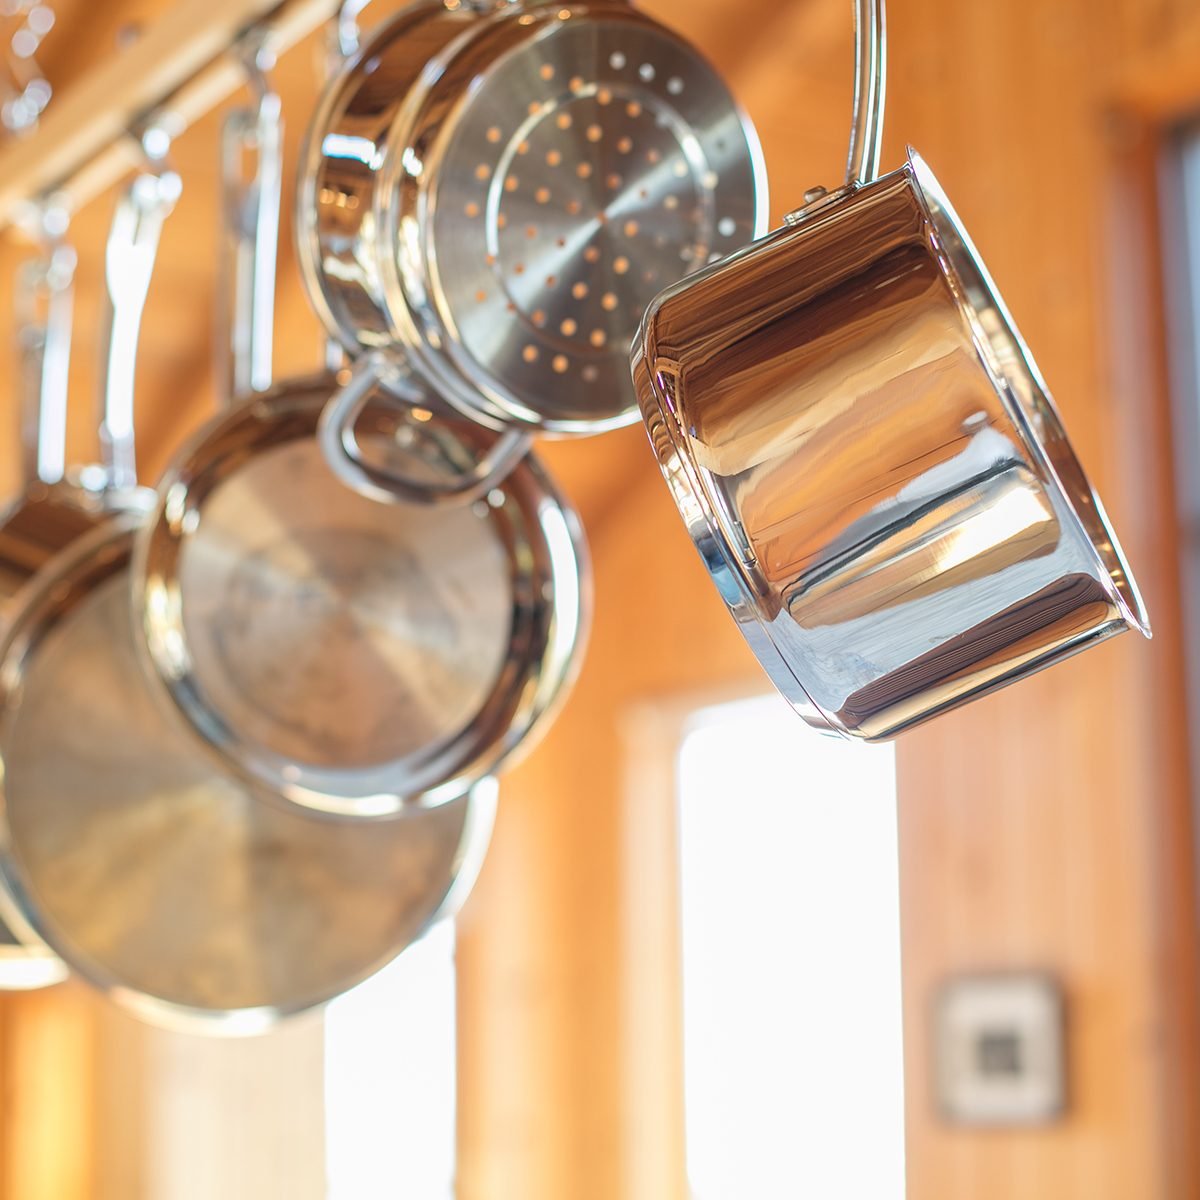 kitchen safety - Can I use stainless steel scrub to clean regular dishes? -  Seasoned Advice